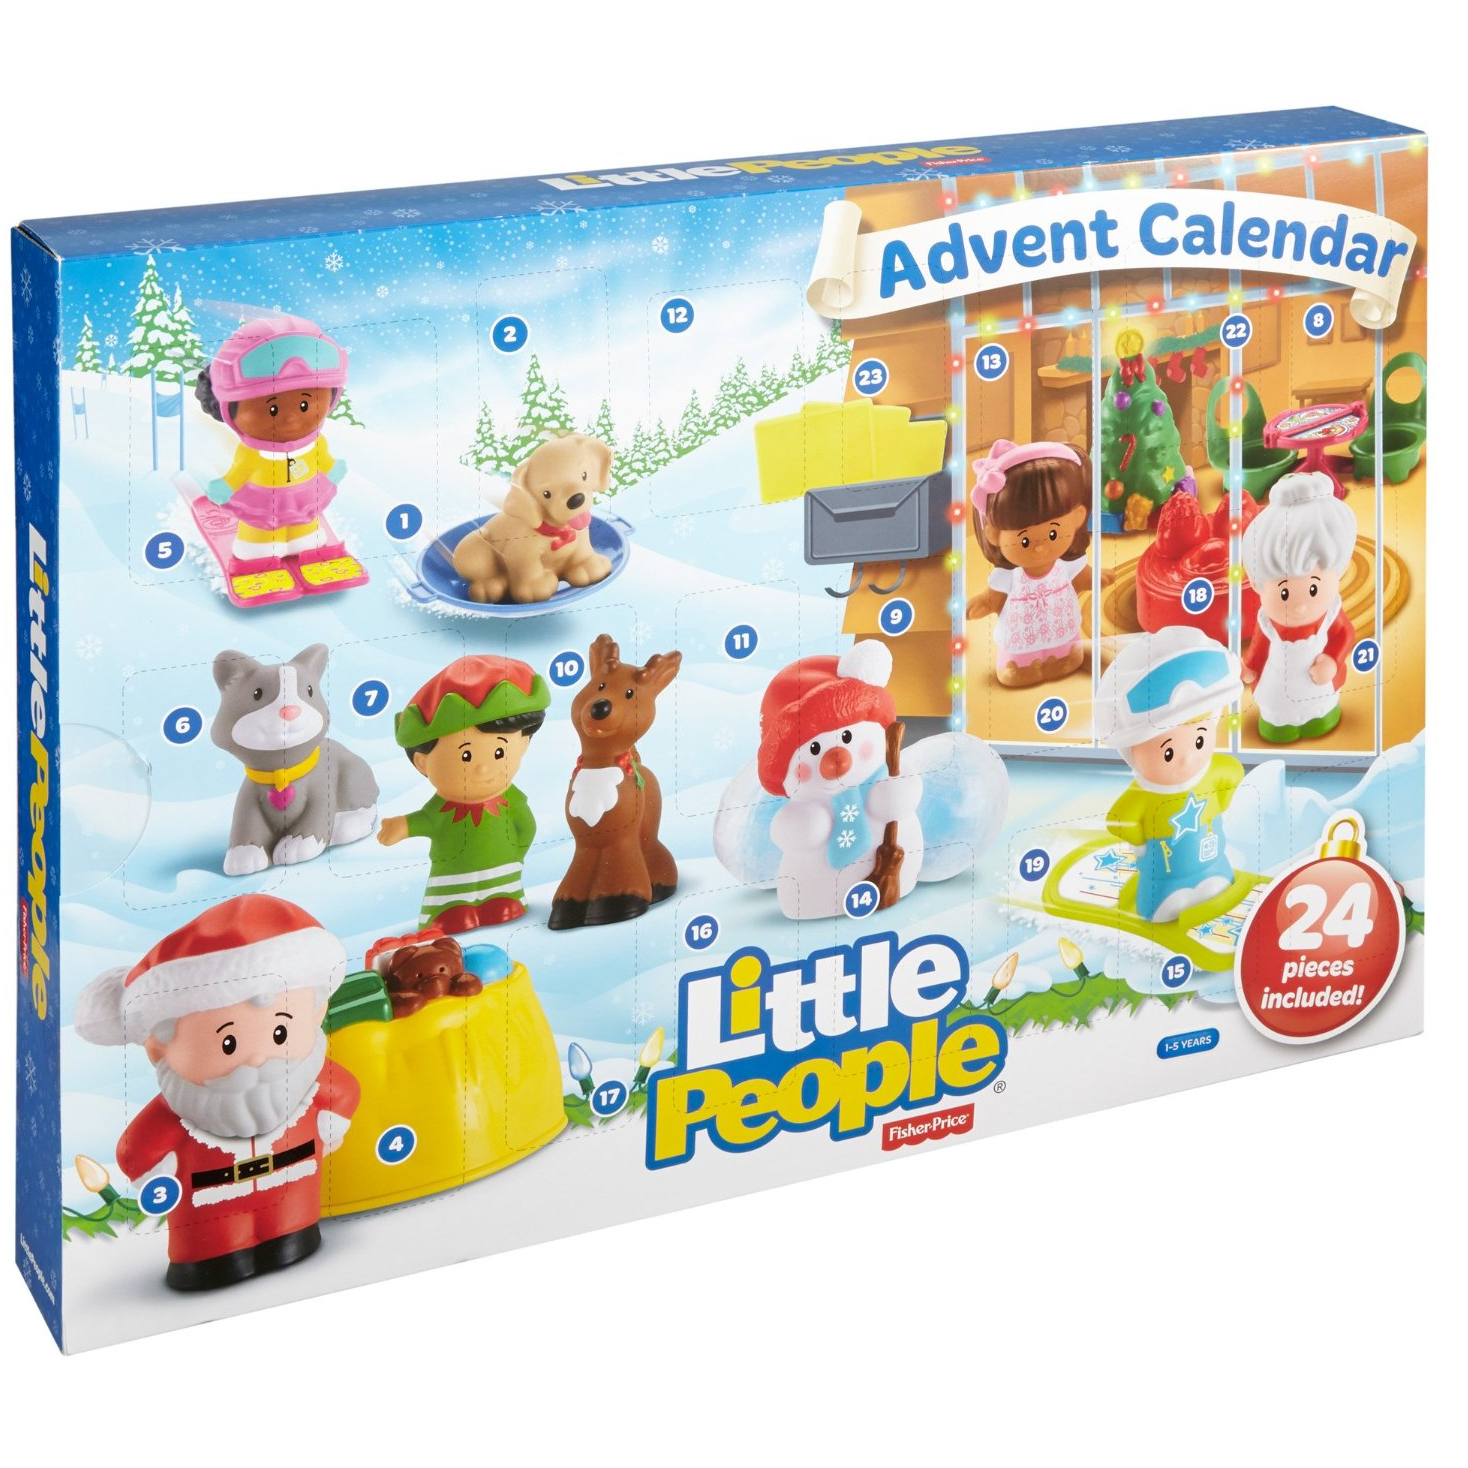 Save $10 Off Your $40 Fisher Price Purchase on Amazon! Get The Little People Advent Calendar & Phone For Only $33.00 After Discount!